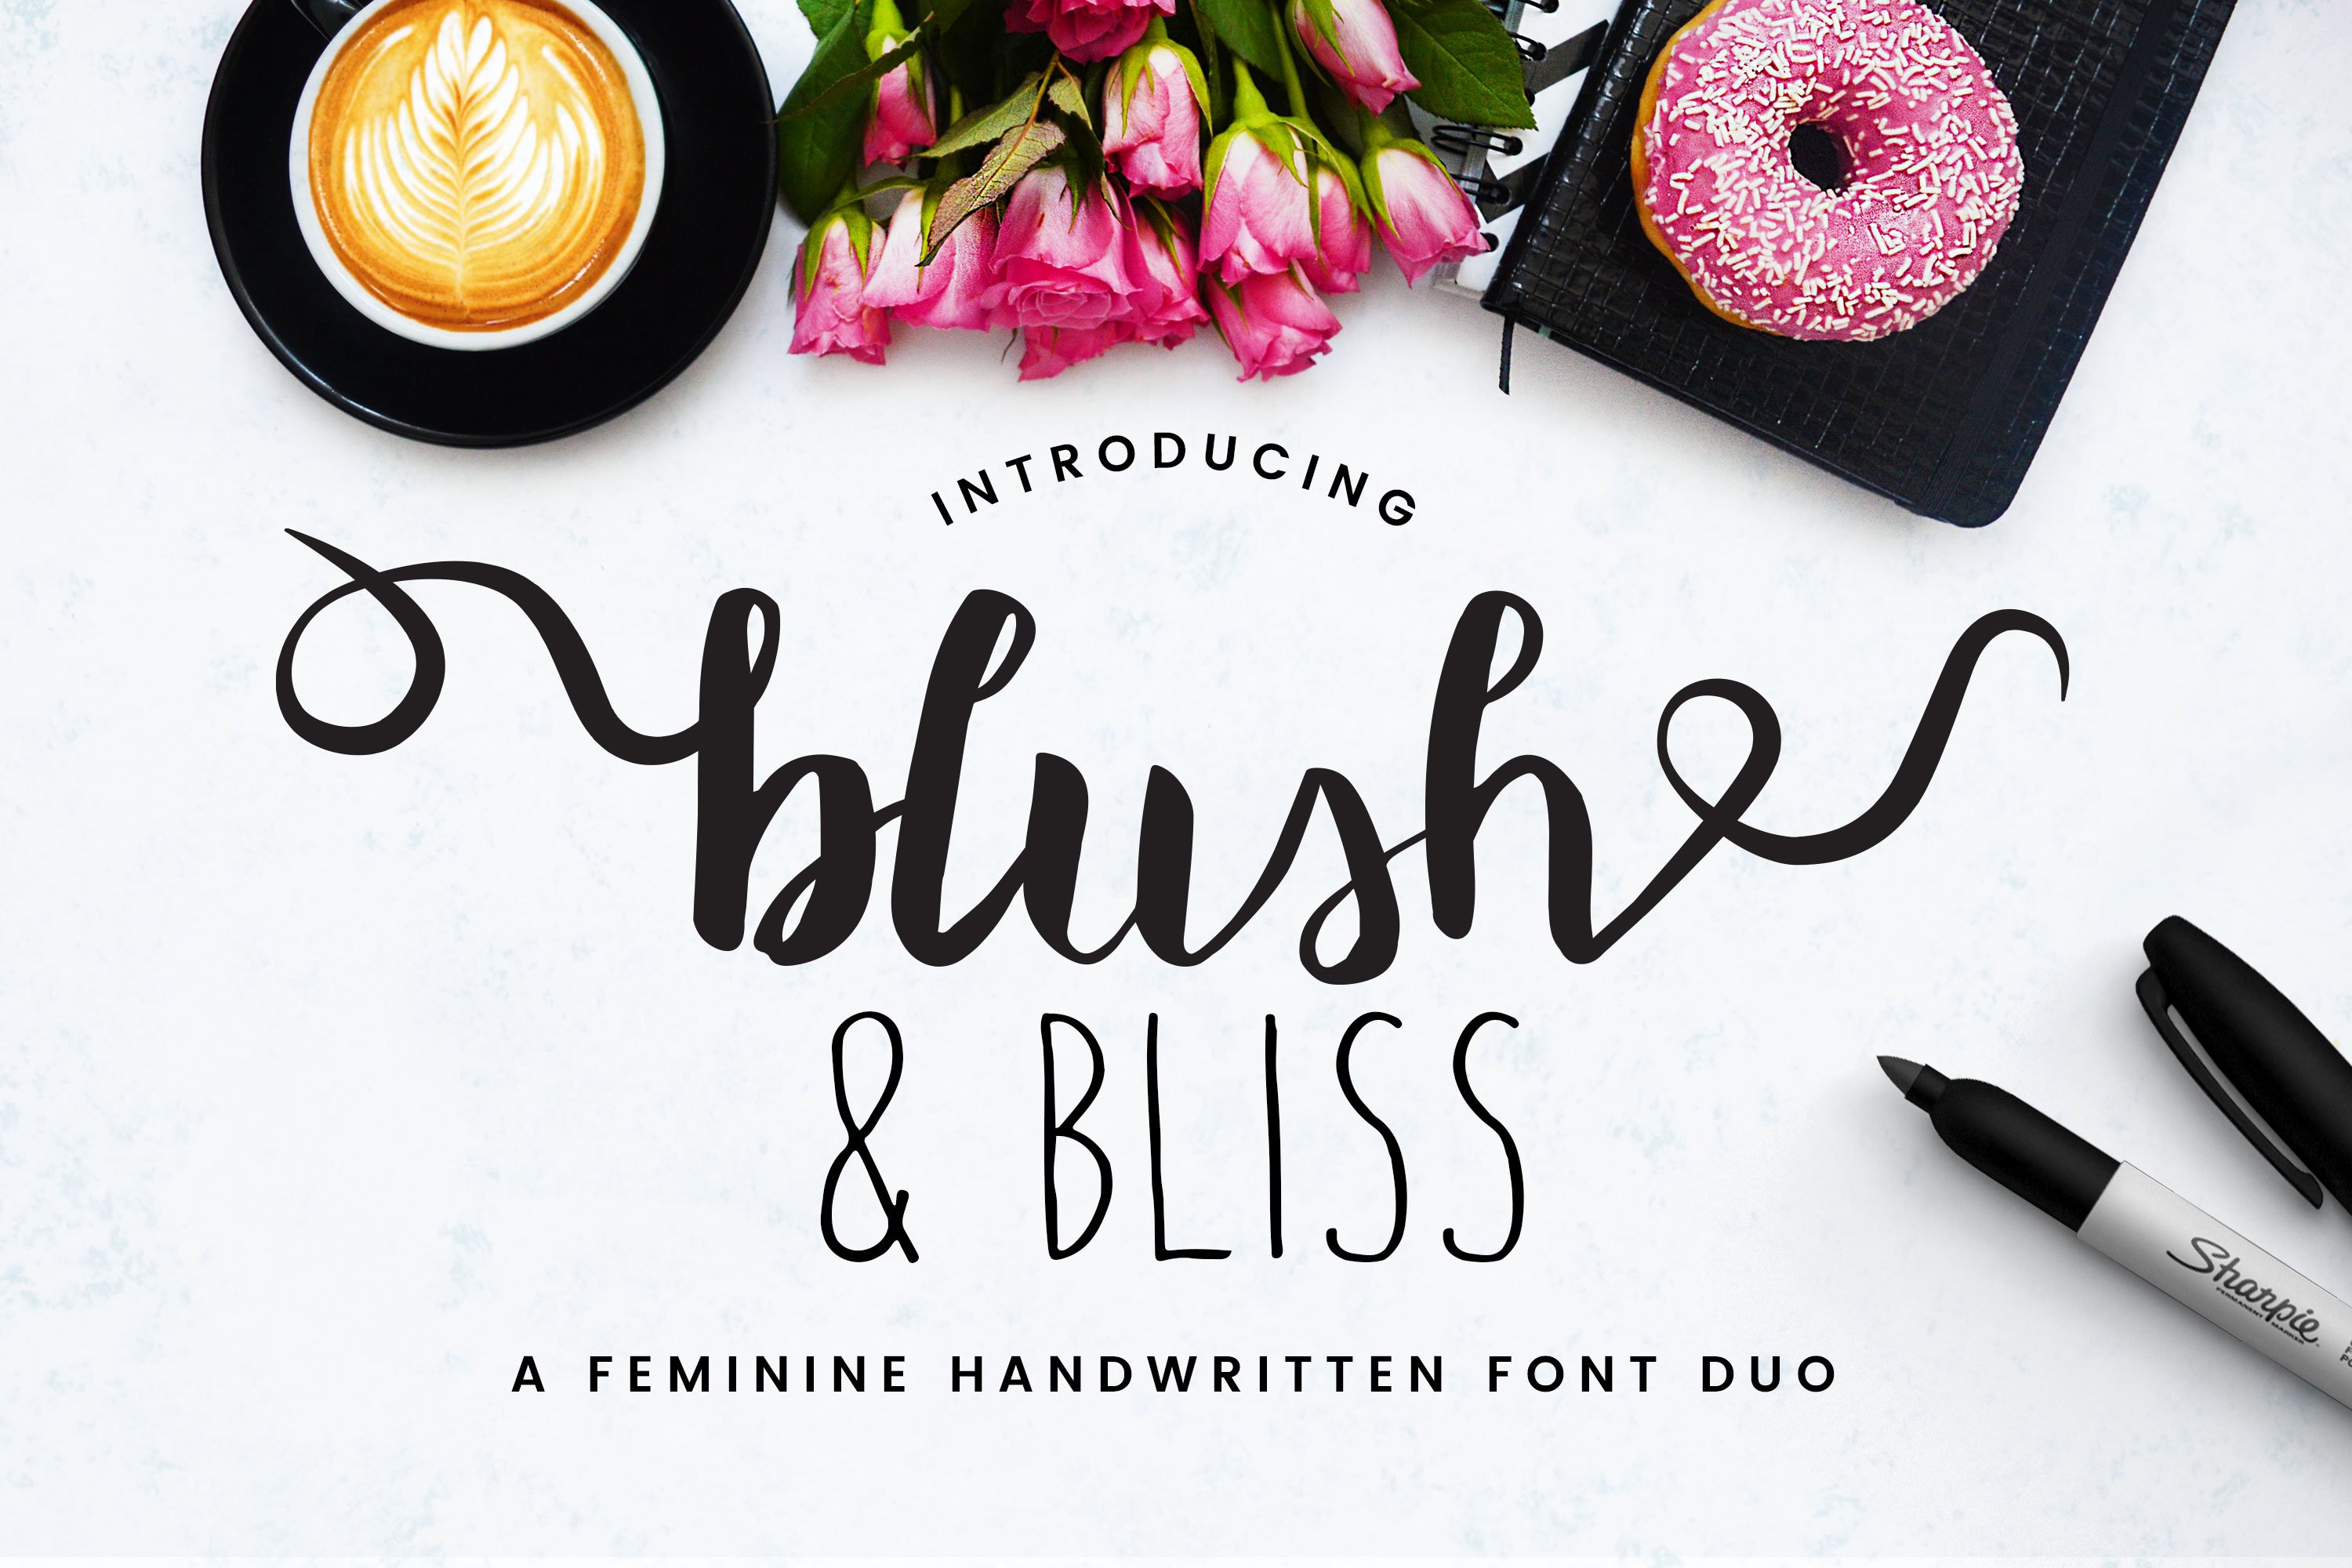 Blush & Bliss | A Font Duo cover image.